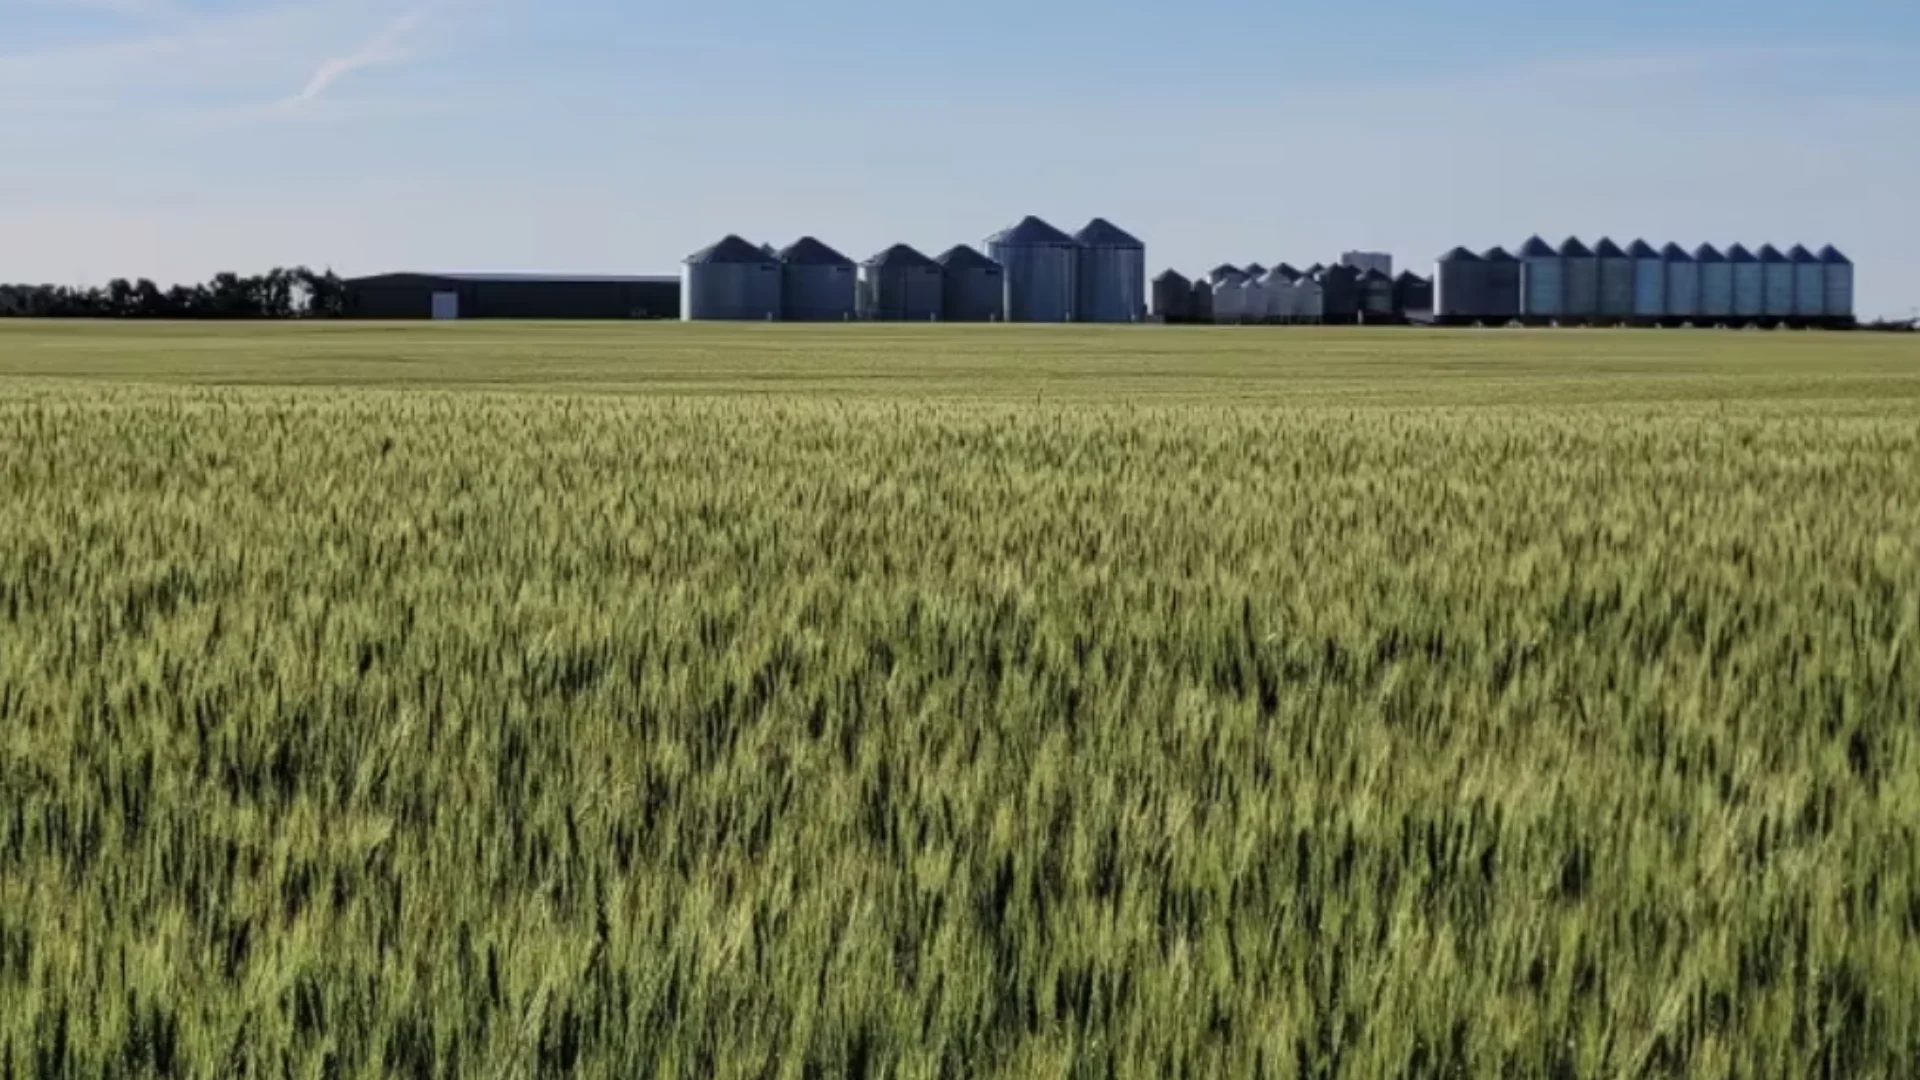 Warm and dry weather has Saskatchewan farmers concerned about future yields